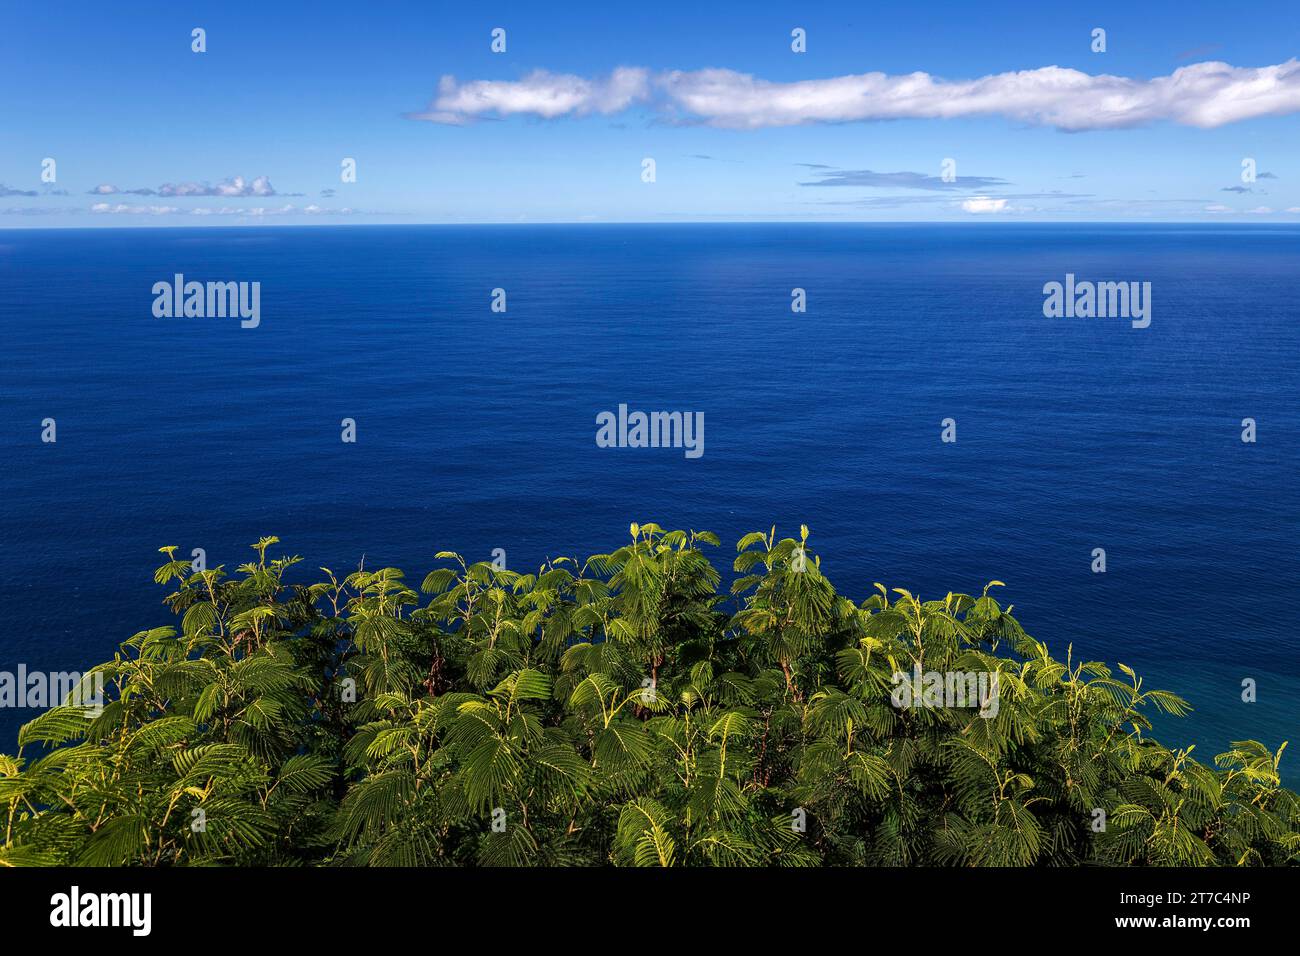 Gulmohar tree in front of the blue sea, Madeira, Portugal Stock Photo